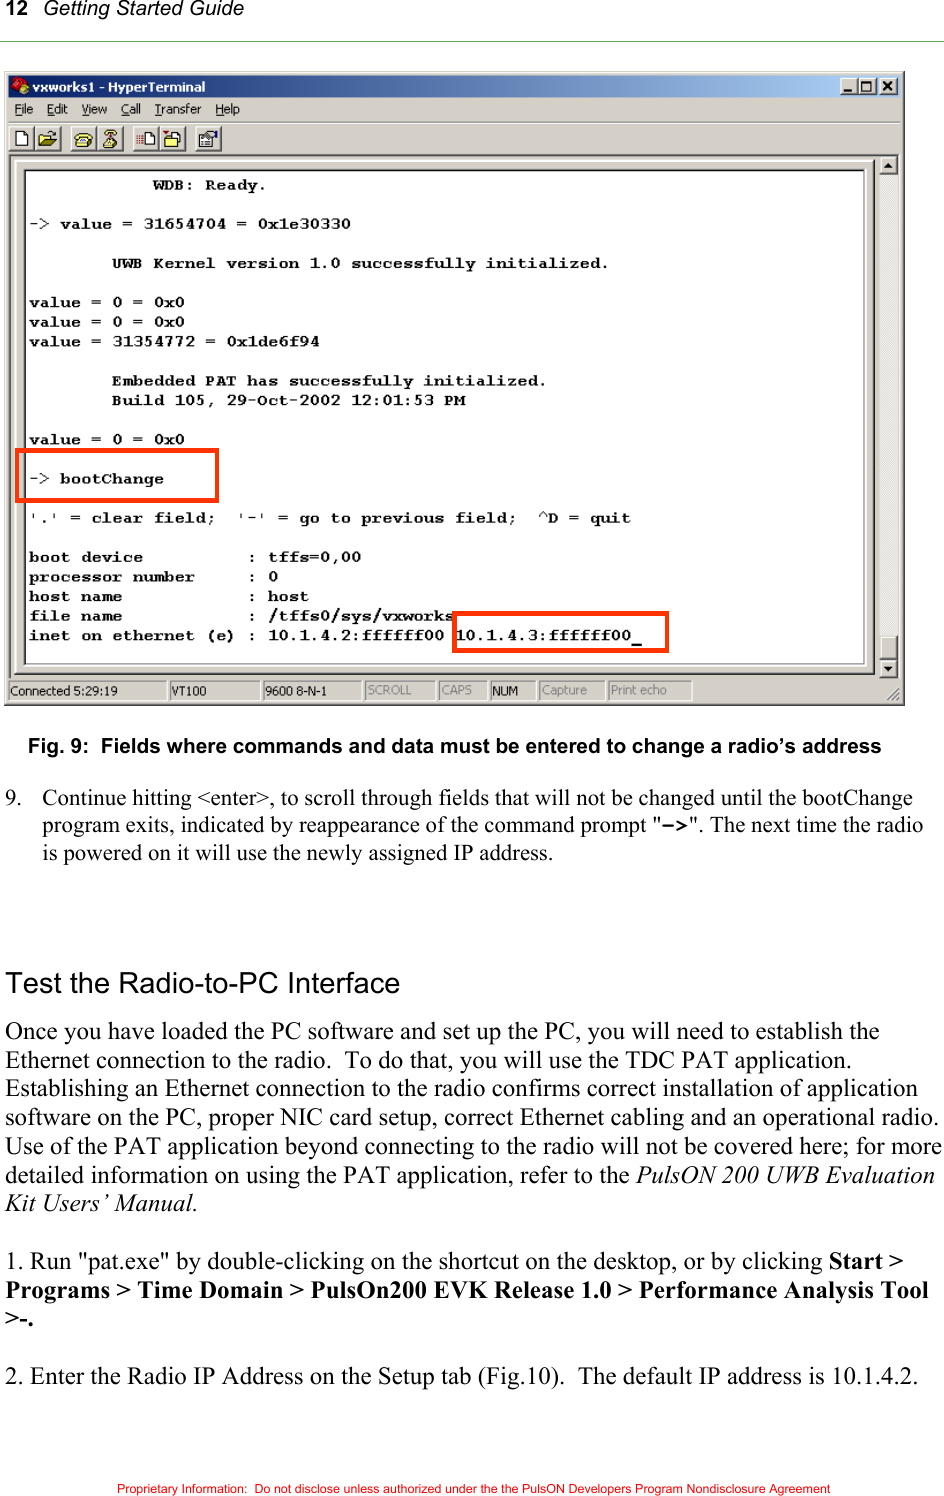 Getting Started Guide 12 Fig. 9:  Fields where commands and data must be entered to change a radio’s address  9.  Continue hitting &lt;enter&gt;, to scroll through fields that will not be changed until the bootChange program exits, indicated by reappearance of the command prompt &quot;-&gt;&quot;. The next time the radio is powered on it will use the newly assigned IP address.   Test the Radio-to-PC Interface      Once you have loaded the PC software and set up the PC, you will need to establish the Ethernet connection to the radio.  To do that, you will use the TDC PAT application. Establishing an Ethernet connection to the radio confirms correct installation of application software on the PC, proper NIC card setup, correct Ethernet cabling and an operational radio. Use of the PAT application beyond connecting to the radio will not be covered here; for more detailed information on using the PAT application, refer to the PulsON 200 UWB Evaluation Kit Users’ Manual.  1. Run &quot;pat.exe&quot; by double-clicking on the shortcut on the desktop, or by clicking Start &gt; Programs &gt; Time Domain &gt; PulsOn200 EVK Release 1.0 &gt; Performance Analysis Tool &gt;-.  2. Enter the Radio IP Address on the Setup tab (Fig.10).  The default IP address is 10.1.4.2.  Proprietary Information:  Do not disclose unless authorized under the the PulsON Developers Program Nondisclosure Agreement 